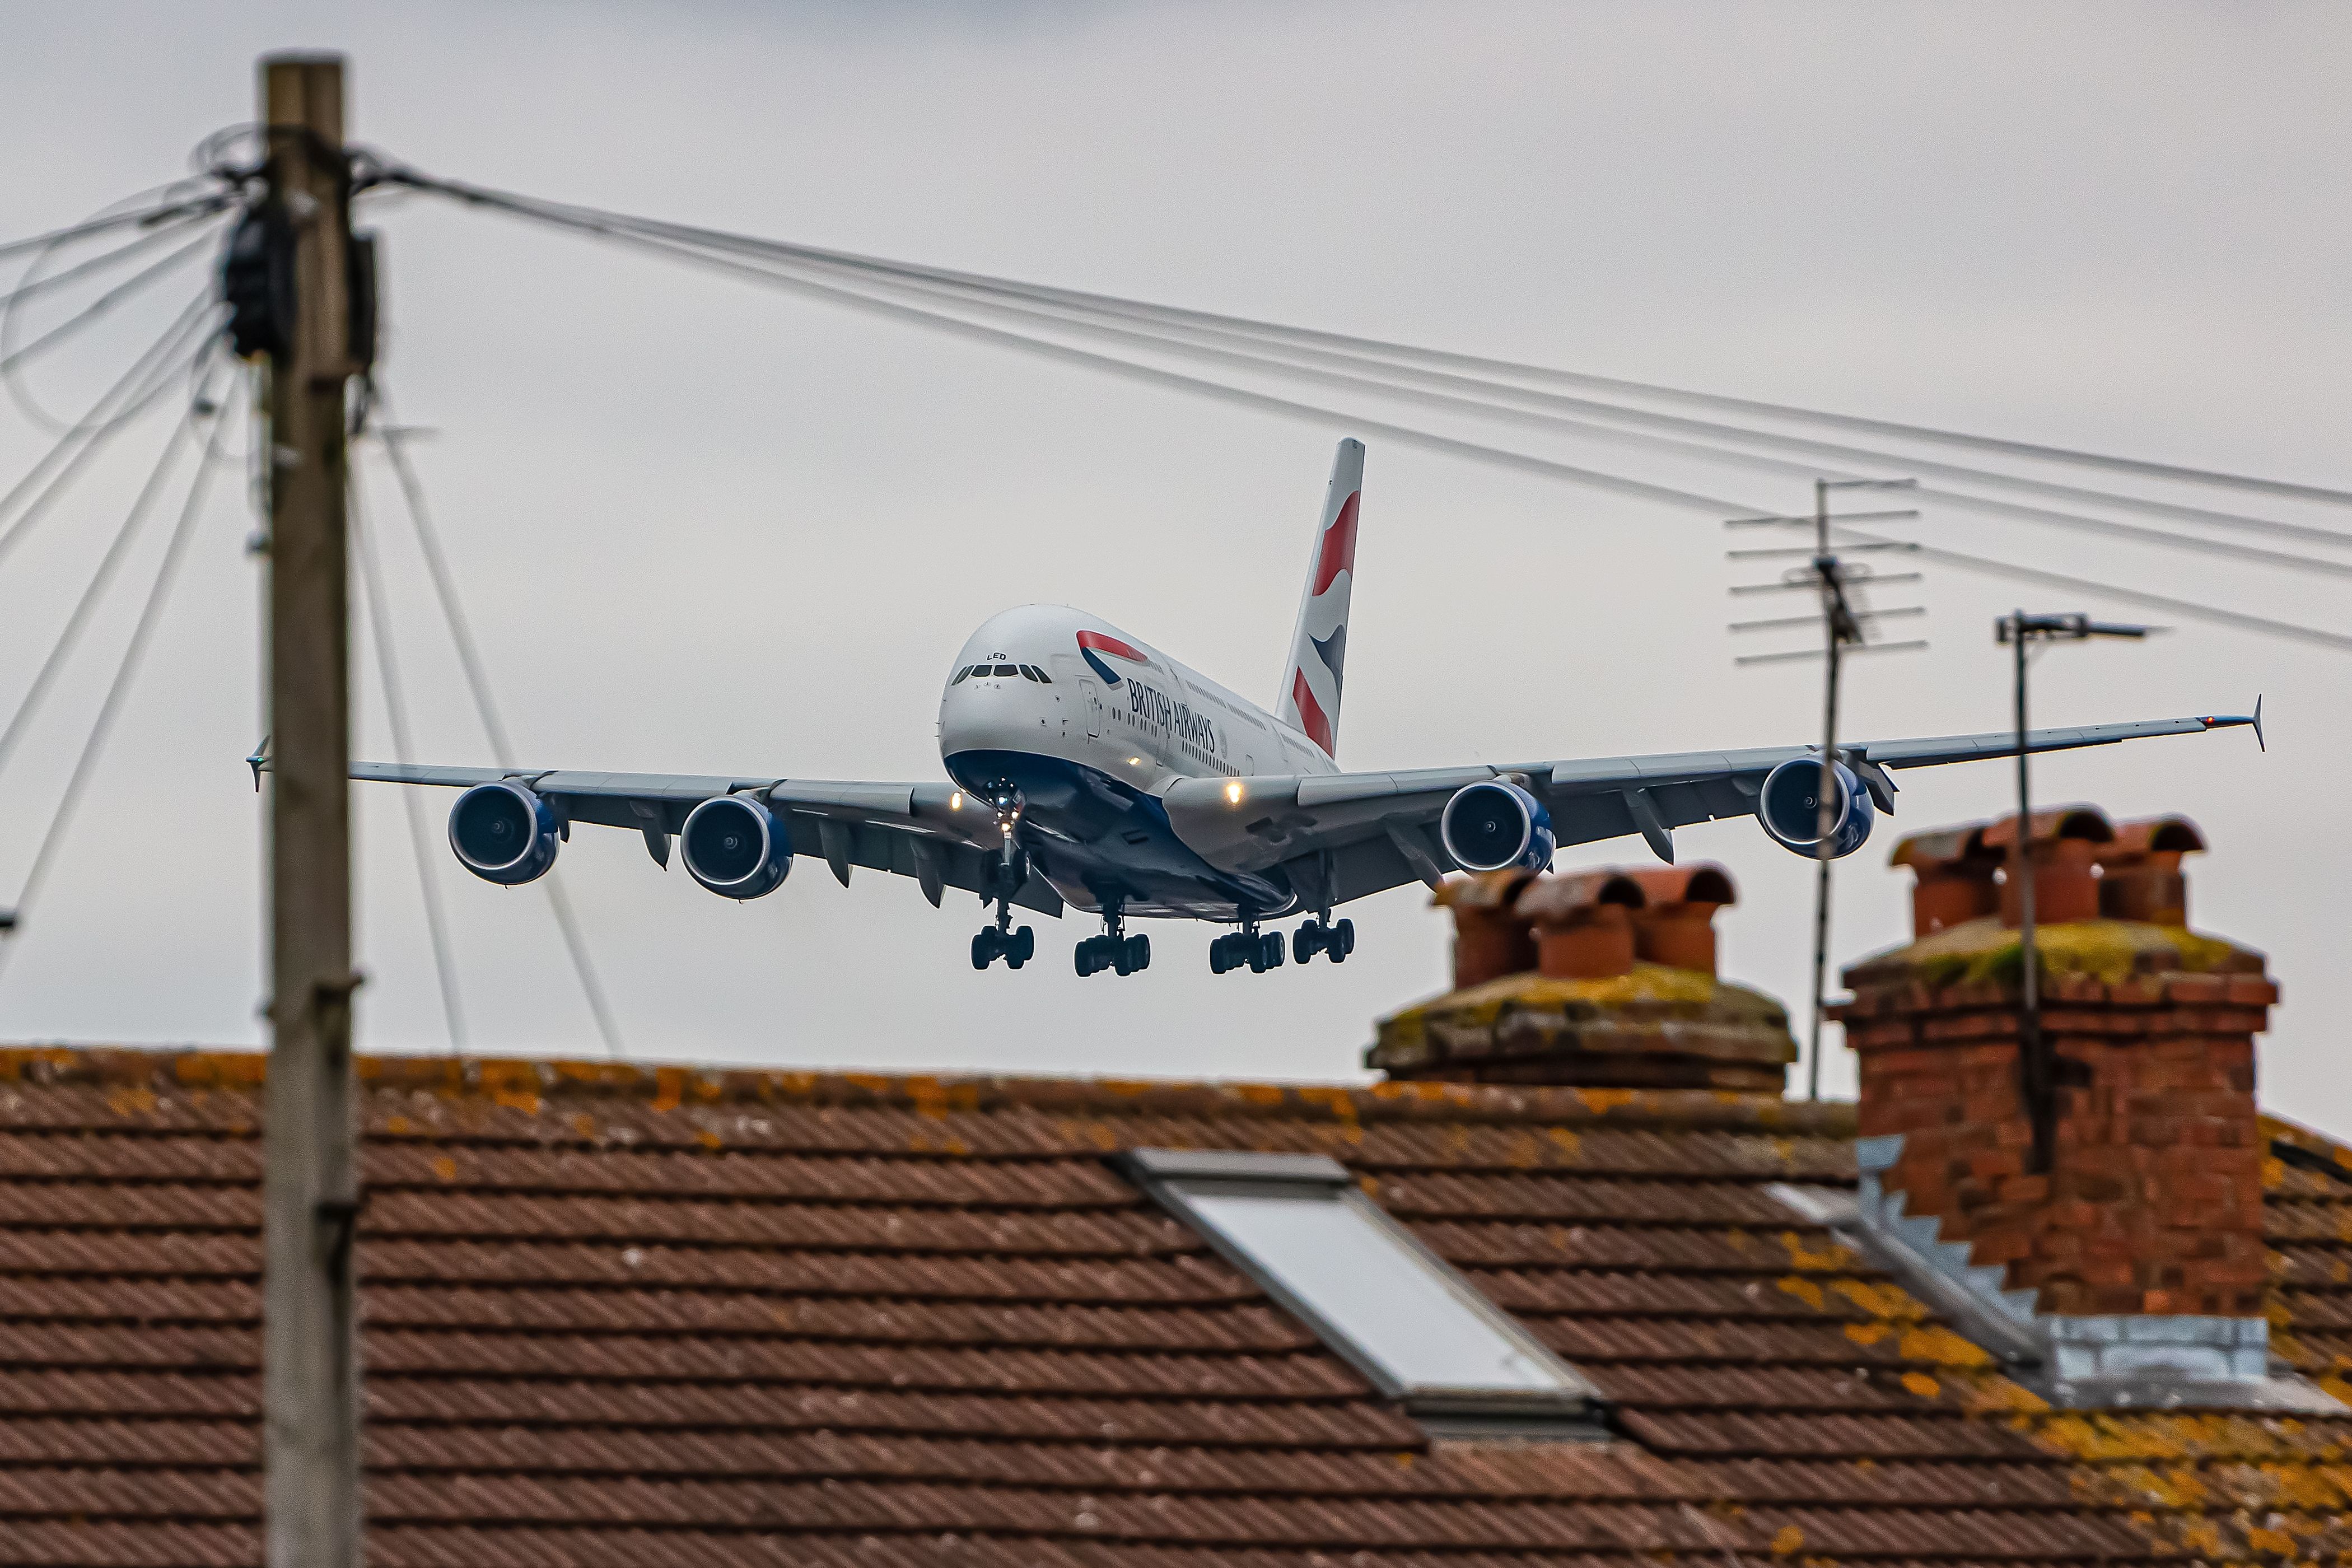 A British Airways Airbus A380 about to land at London Heathrow Airport.